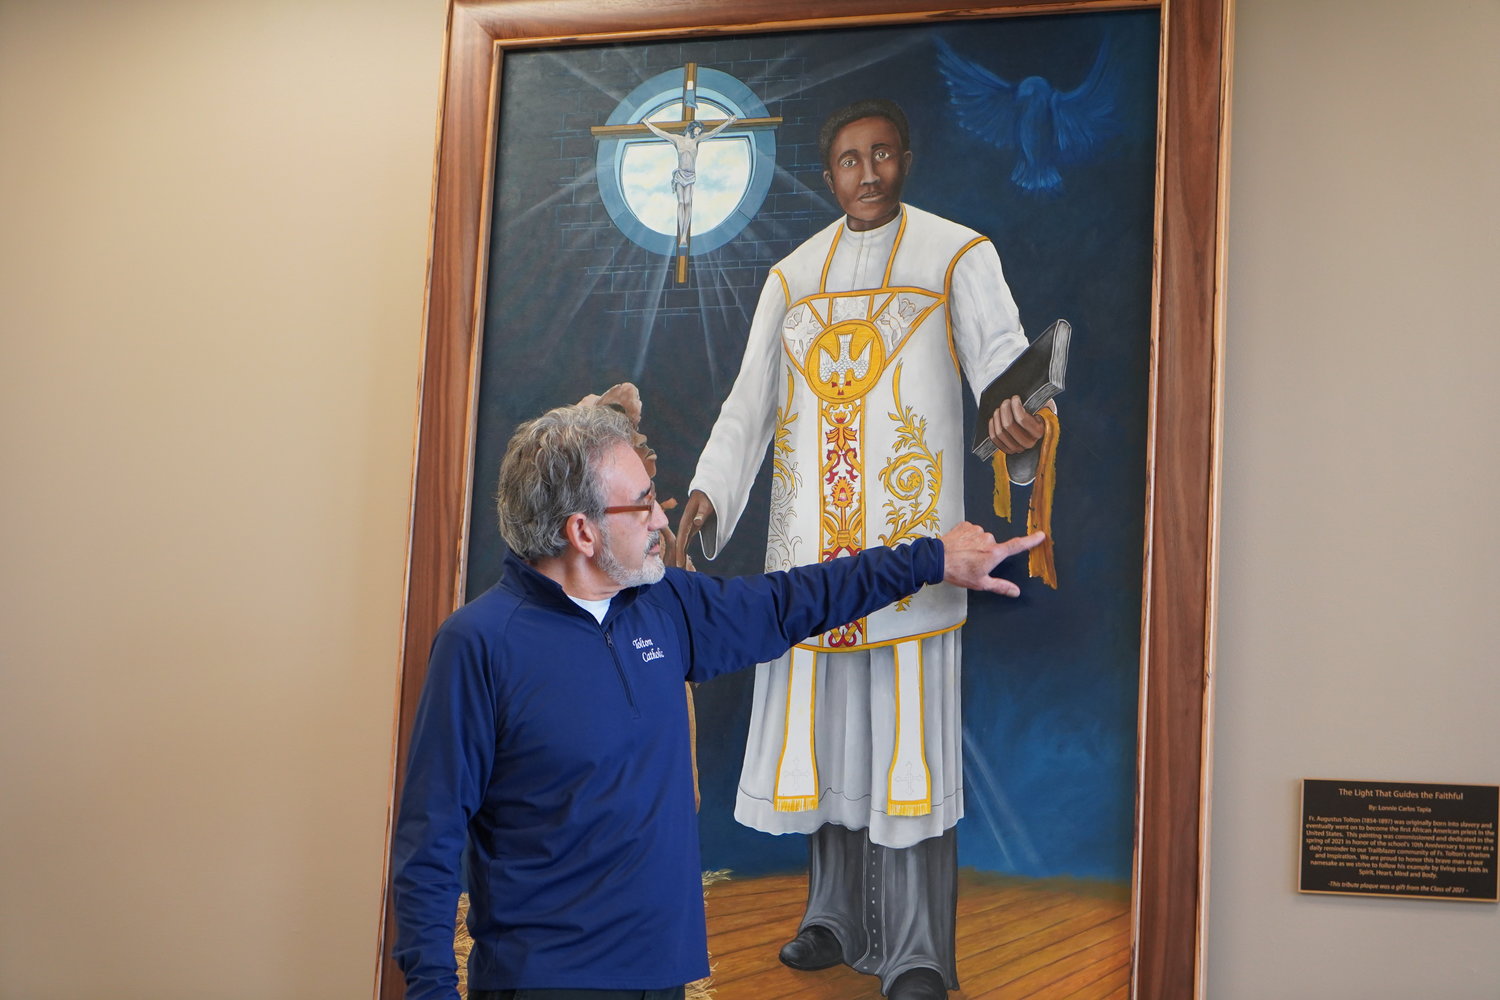 Lonnie Carlos Tapia, who teaches art, photography and design at Fr. Tolton Regional Catholic High School in Columbia, draws attention to symbols he incorporated into the new painting of Venerable Fr. Augustus Tolton commissioned for the school’s 10th anniversary, during a May 14 unveiling and dedication ceremony. The school’s Class of 2021 donated the plaque beside the painting, which hangs in a busy area next to the chapel of the school building.